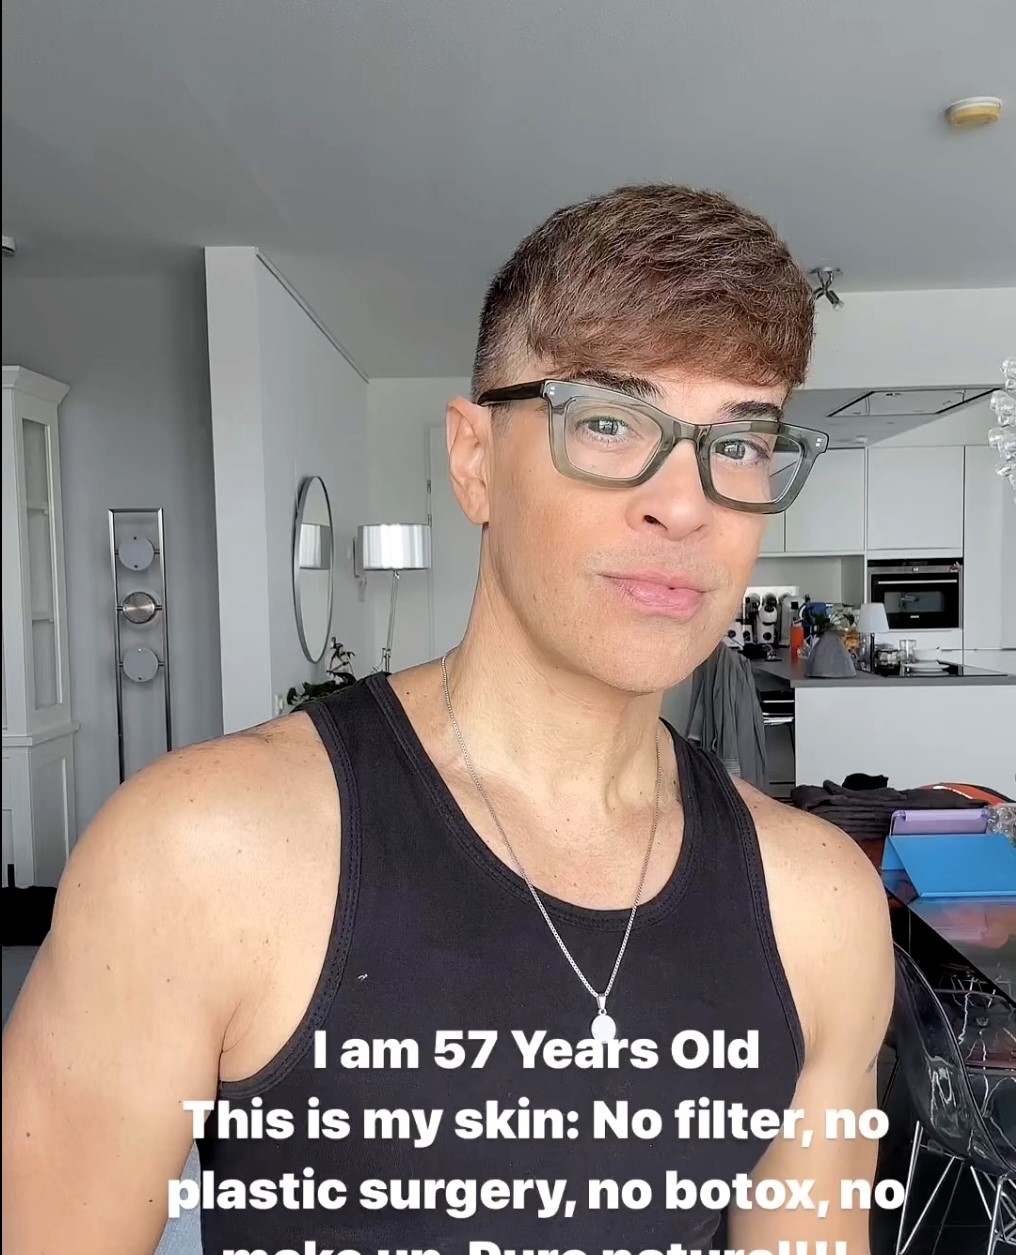 A 57-year-old man from the Netherlands sparks disbelief on Instagram with his remarkably youthful appearance. Viewers speculate on plastic surgery or AI manipulation, but he asserts his natural look, attributing it to a healthy and positive lifestyle